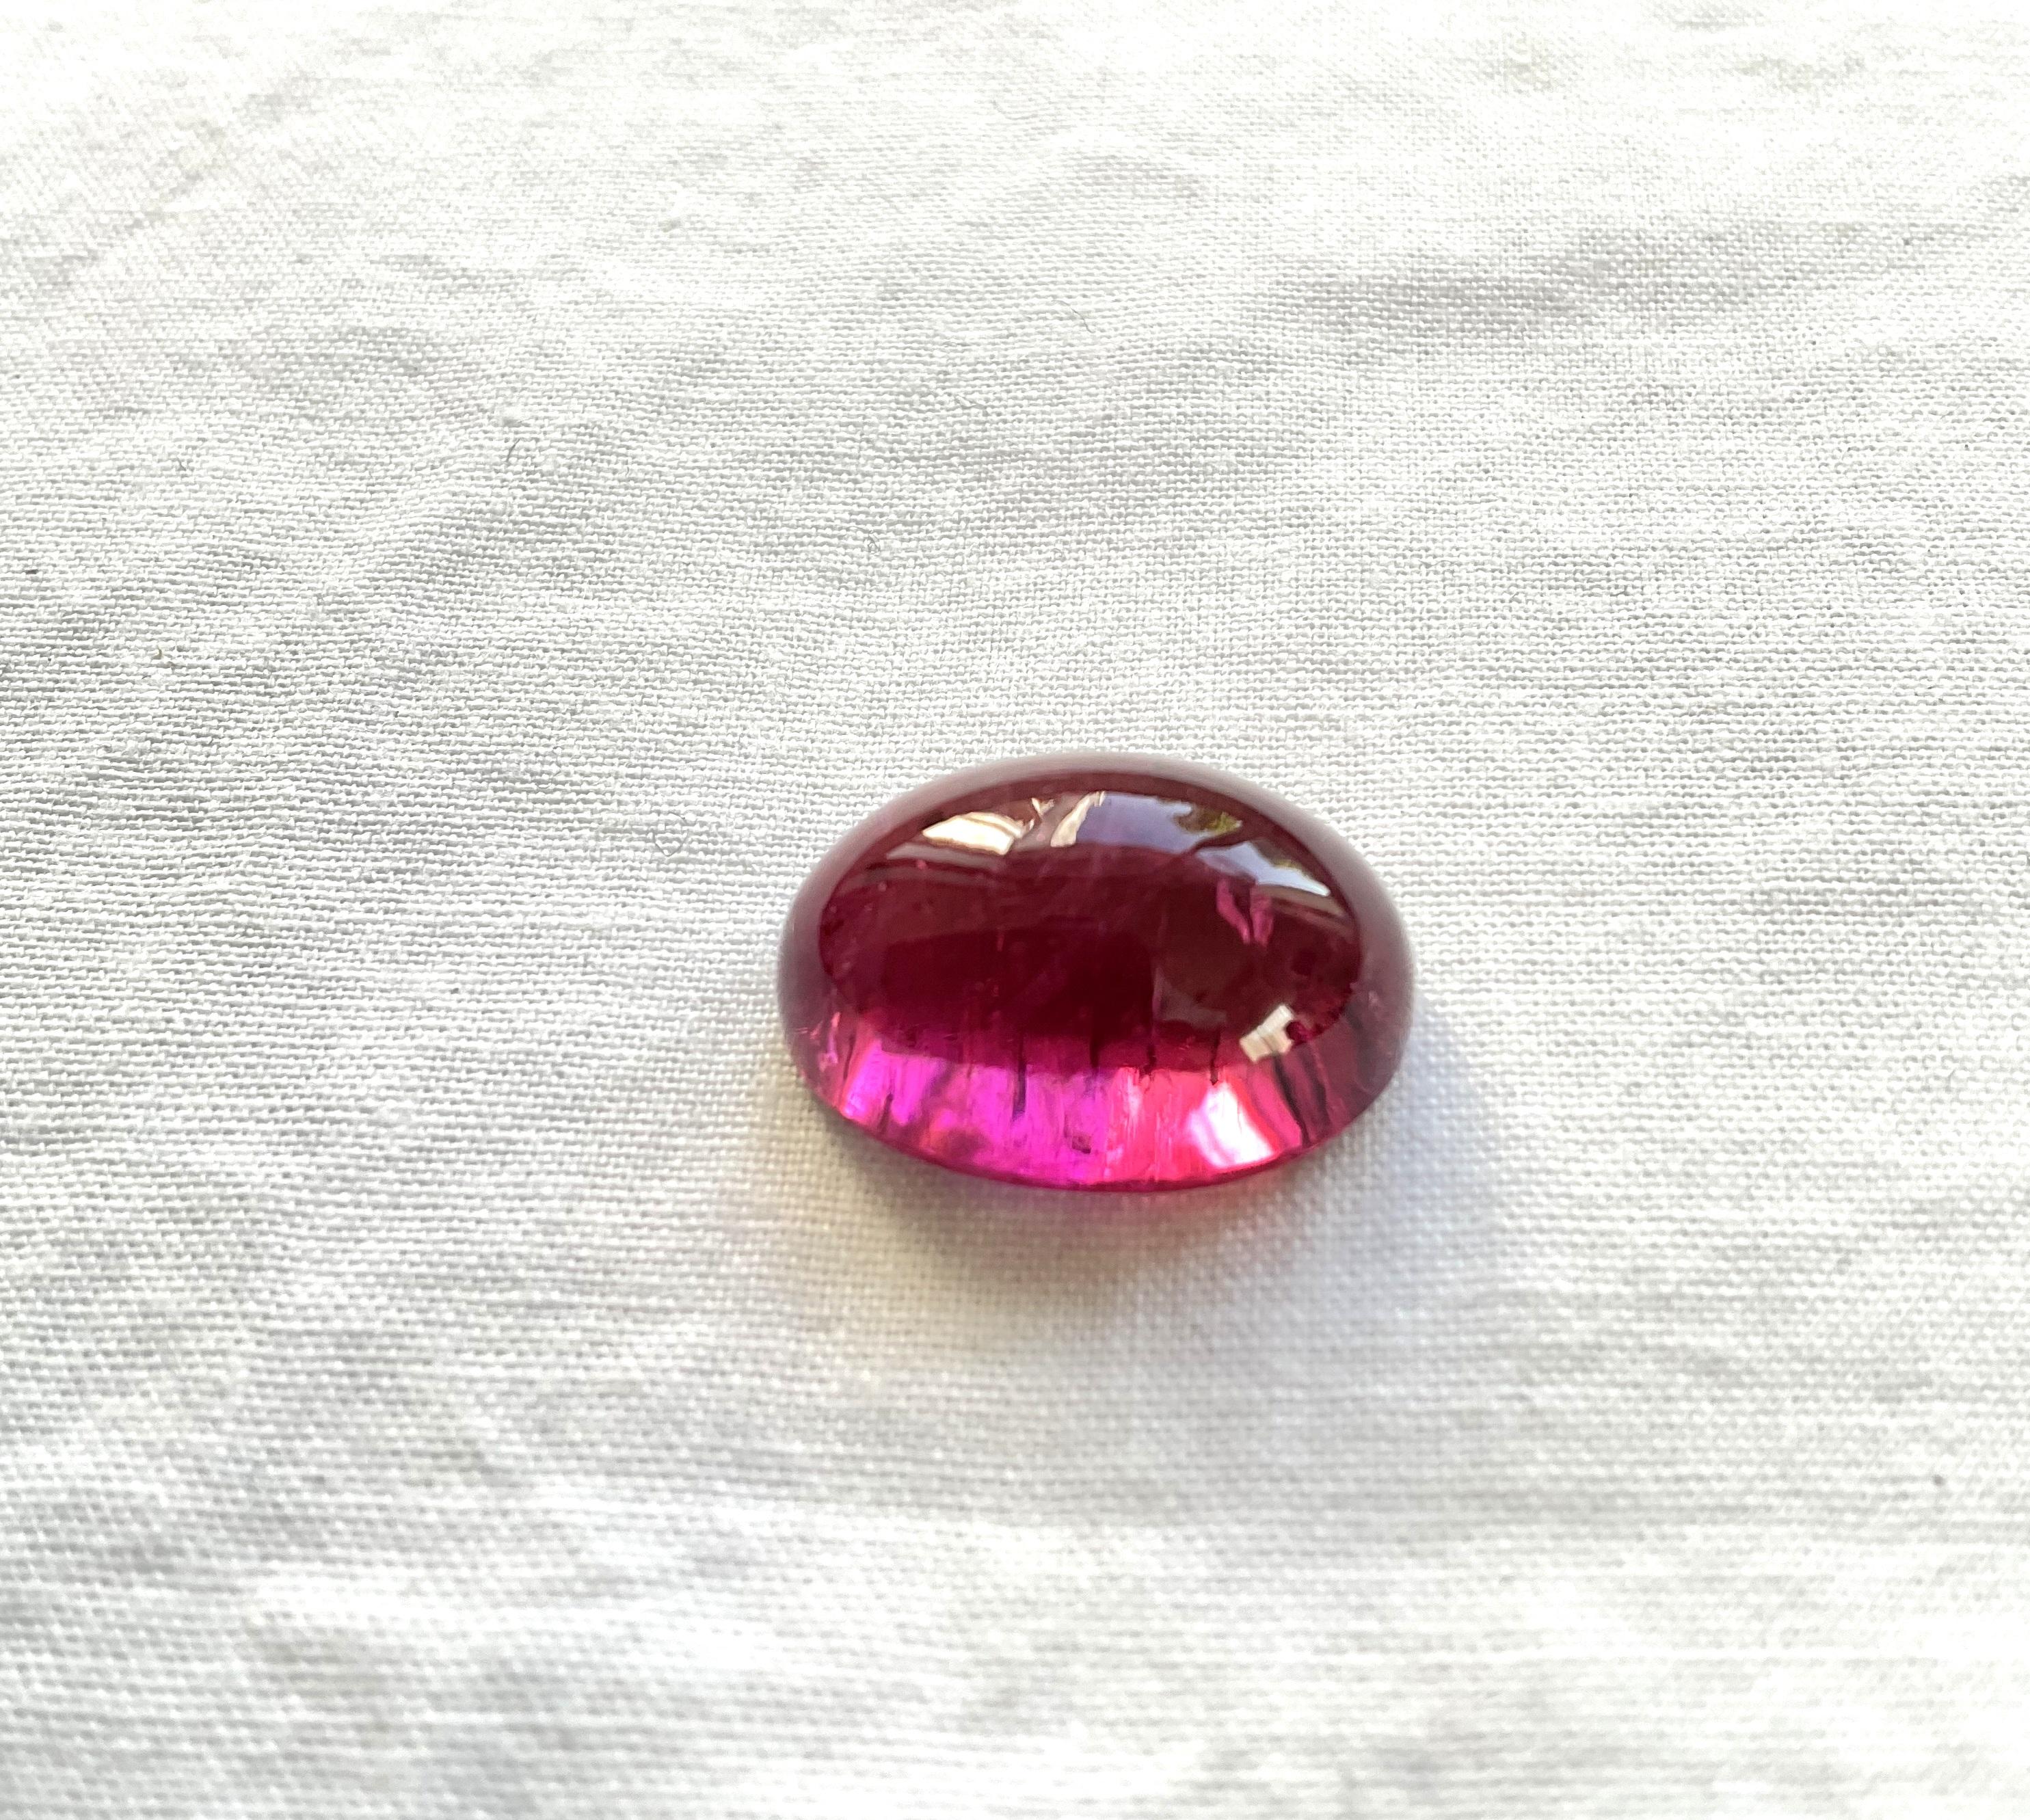 This is a one of a kind of rubellite tourmaline with vivid color tone.
Gemstone - Rubellite Tourmaline
Weight -  11.93 Ct
Size - 16.24x11.50 MM
Piece - 1

